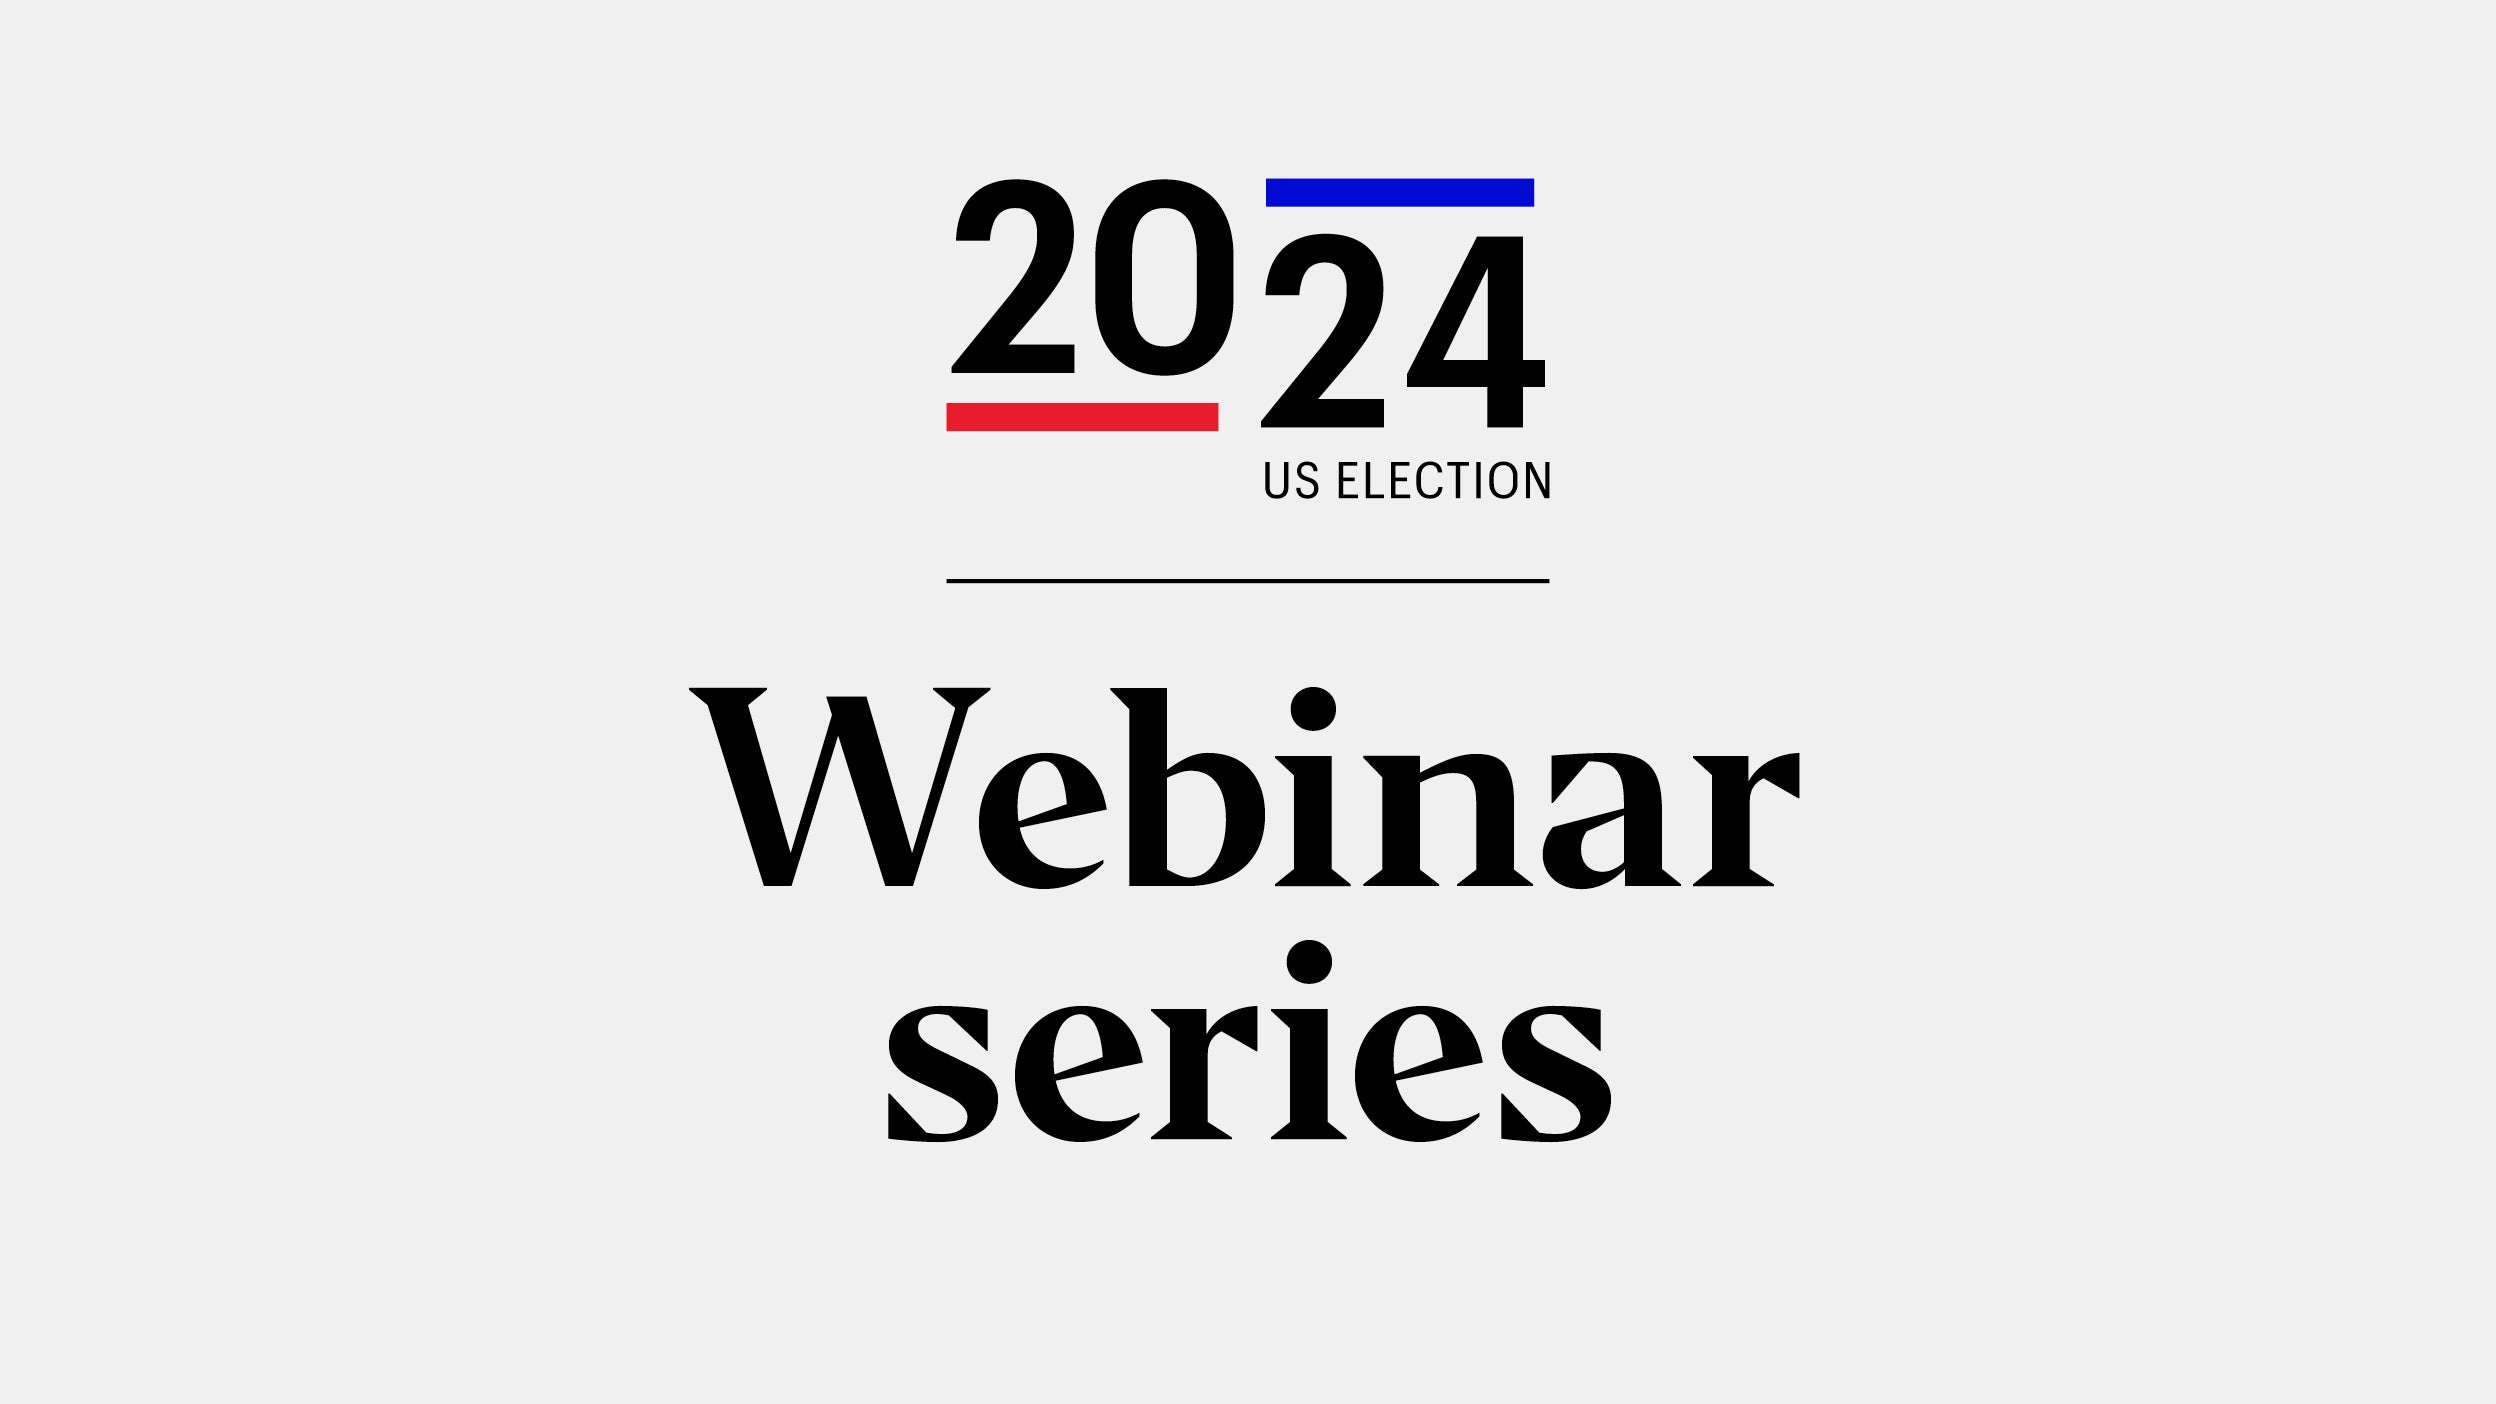 The 2024 US presidential election: Implications for investors